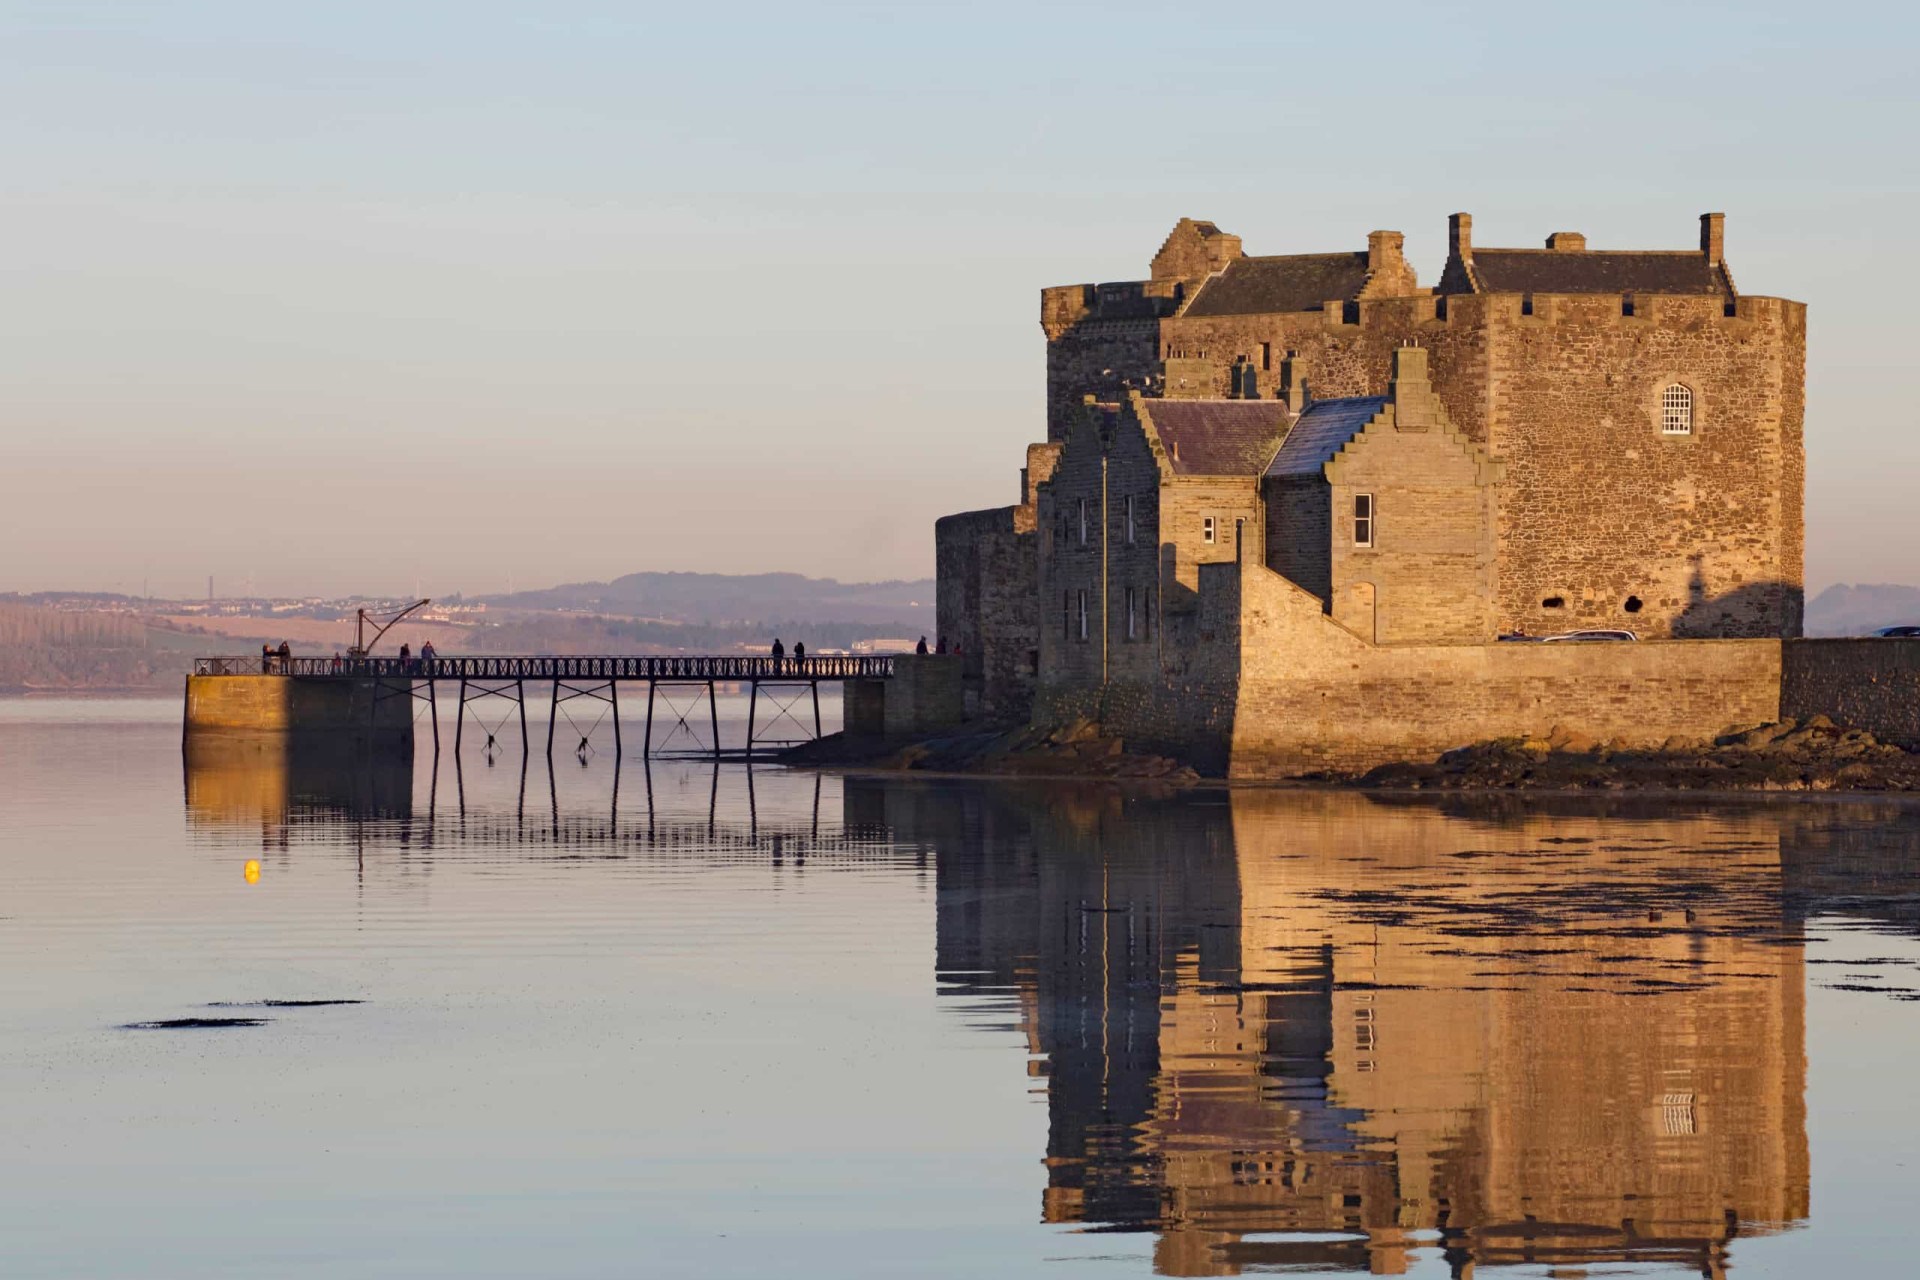 <p>Don't be surprised if you hear the ghostly rattling of prison chains at this impressive stronghold sitting on the water's edge at the picturesque Firth of Forth. The 15th-century castle once served as a jail.</p><p><a href="https://www.msn.com/en-ca/community/channel/vid-7xx8mnucu55yw63we9va2gwr7uihbxwc68fxqp25x6tg4ftibpra?cvid=94631541bc0f4f89bfd59158d696ad7e">Follow us and access great exclusive content every day</a></p>